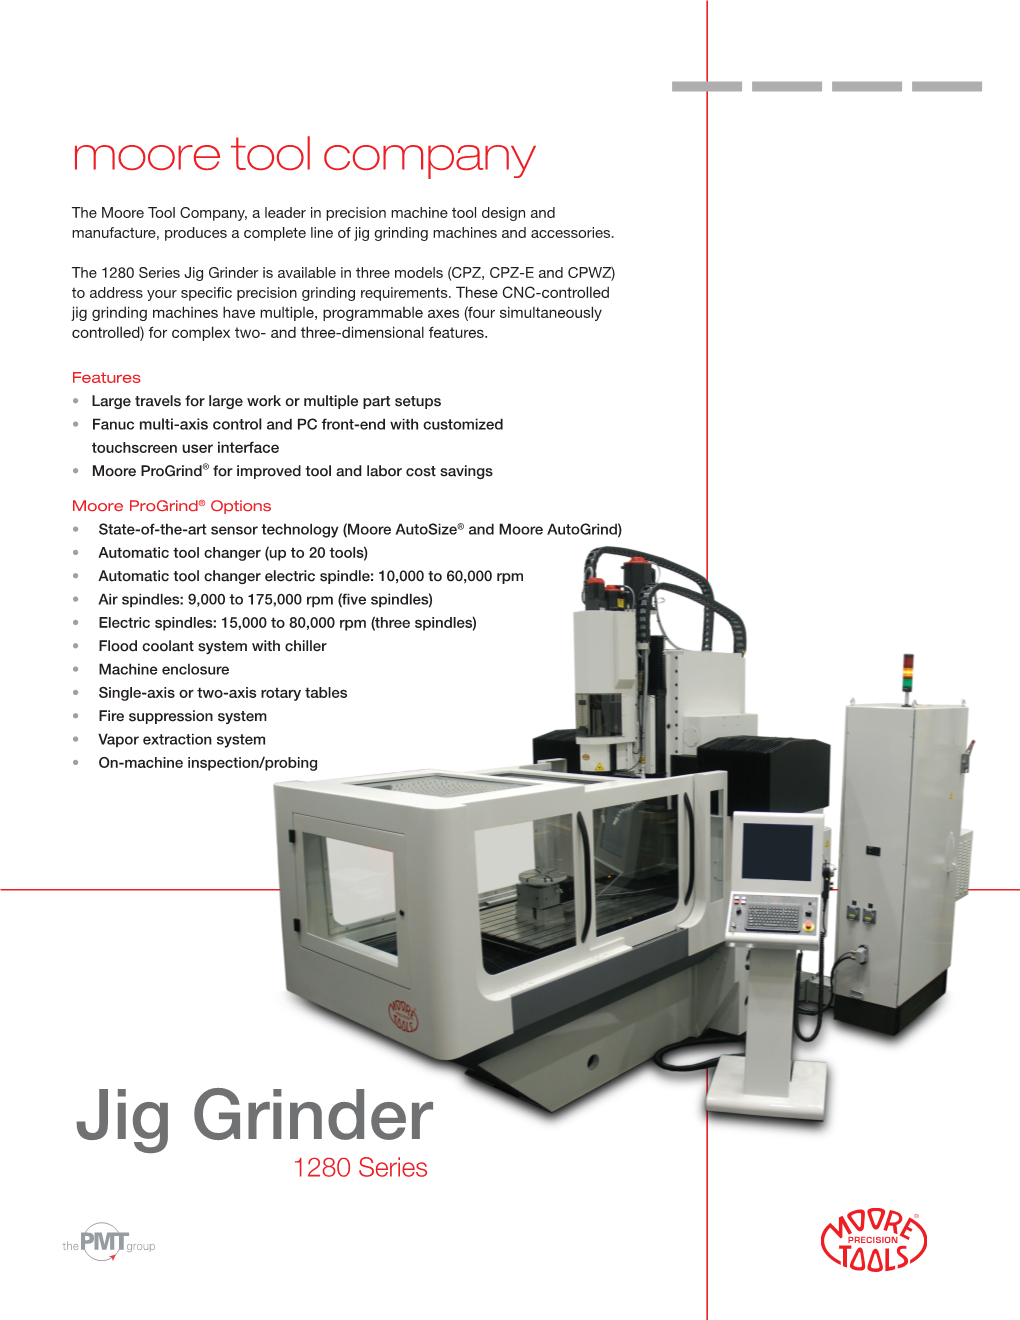 1280 Series Jig Grinder Is Available in Three Models (CPZ, CPZ-E and CPWZ) to Address Your Specific Precision Grinding Requirements